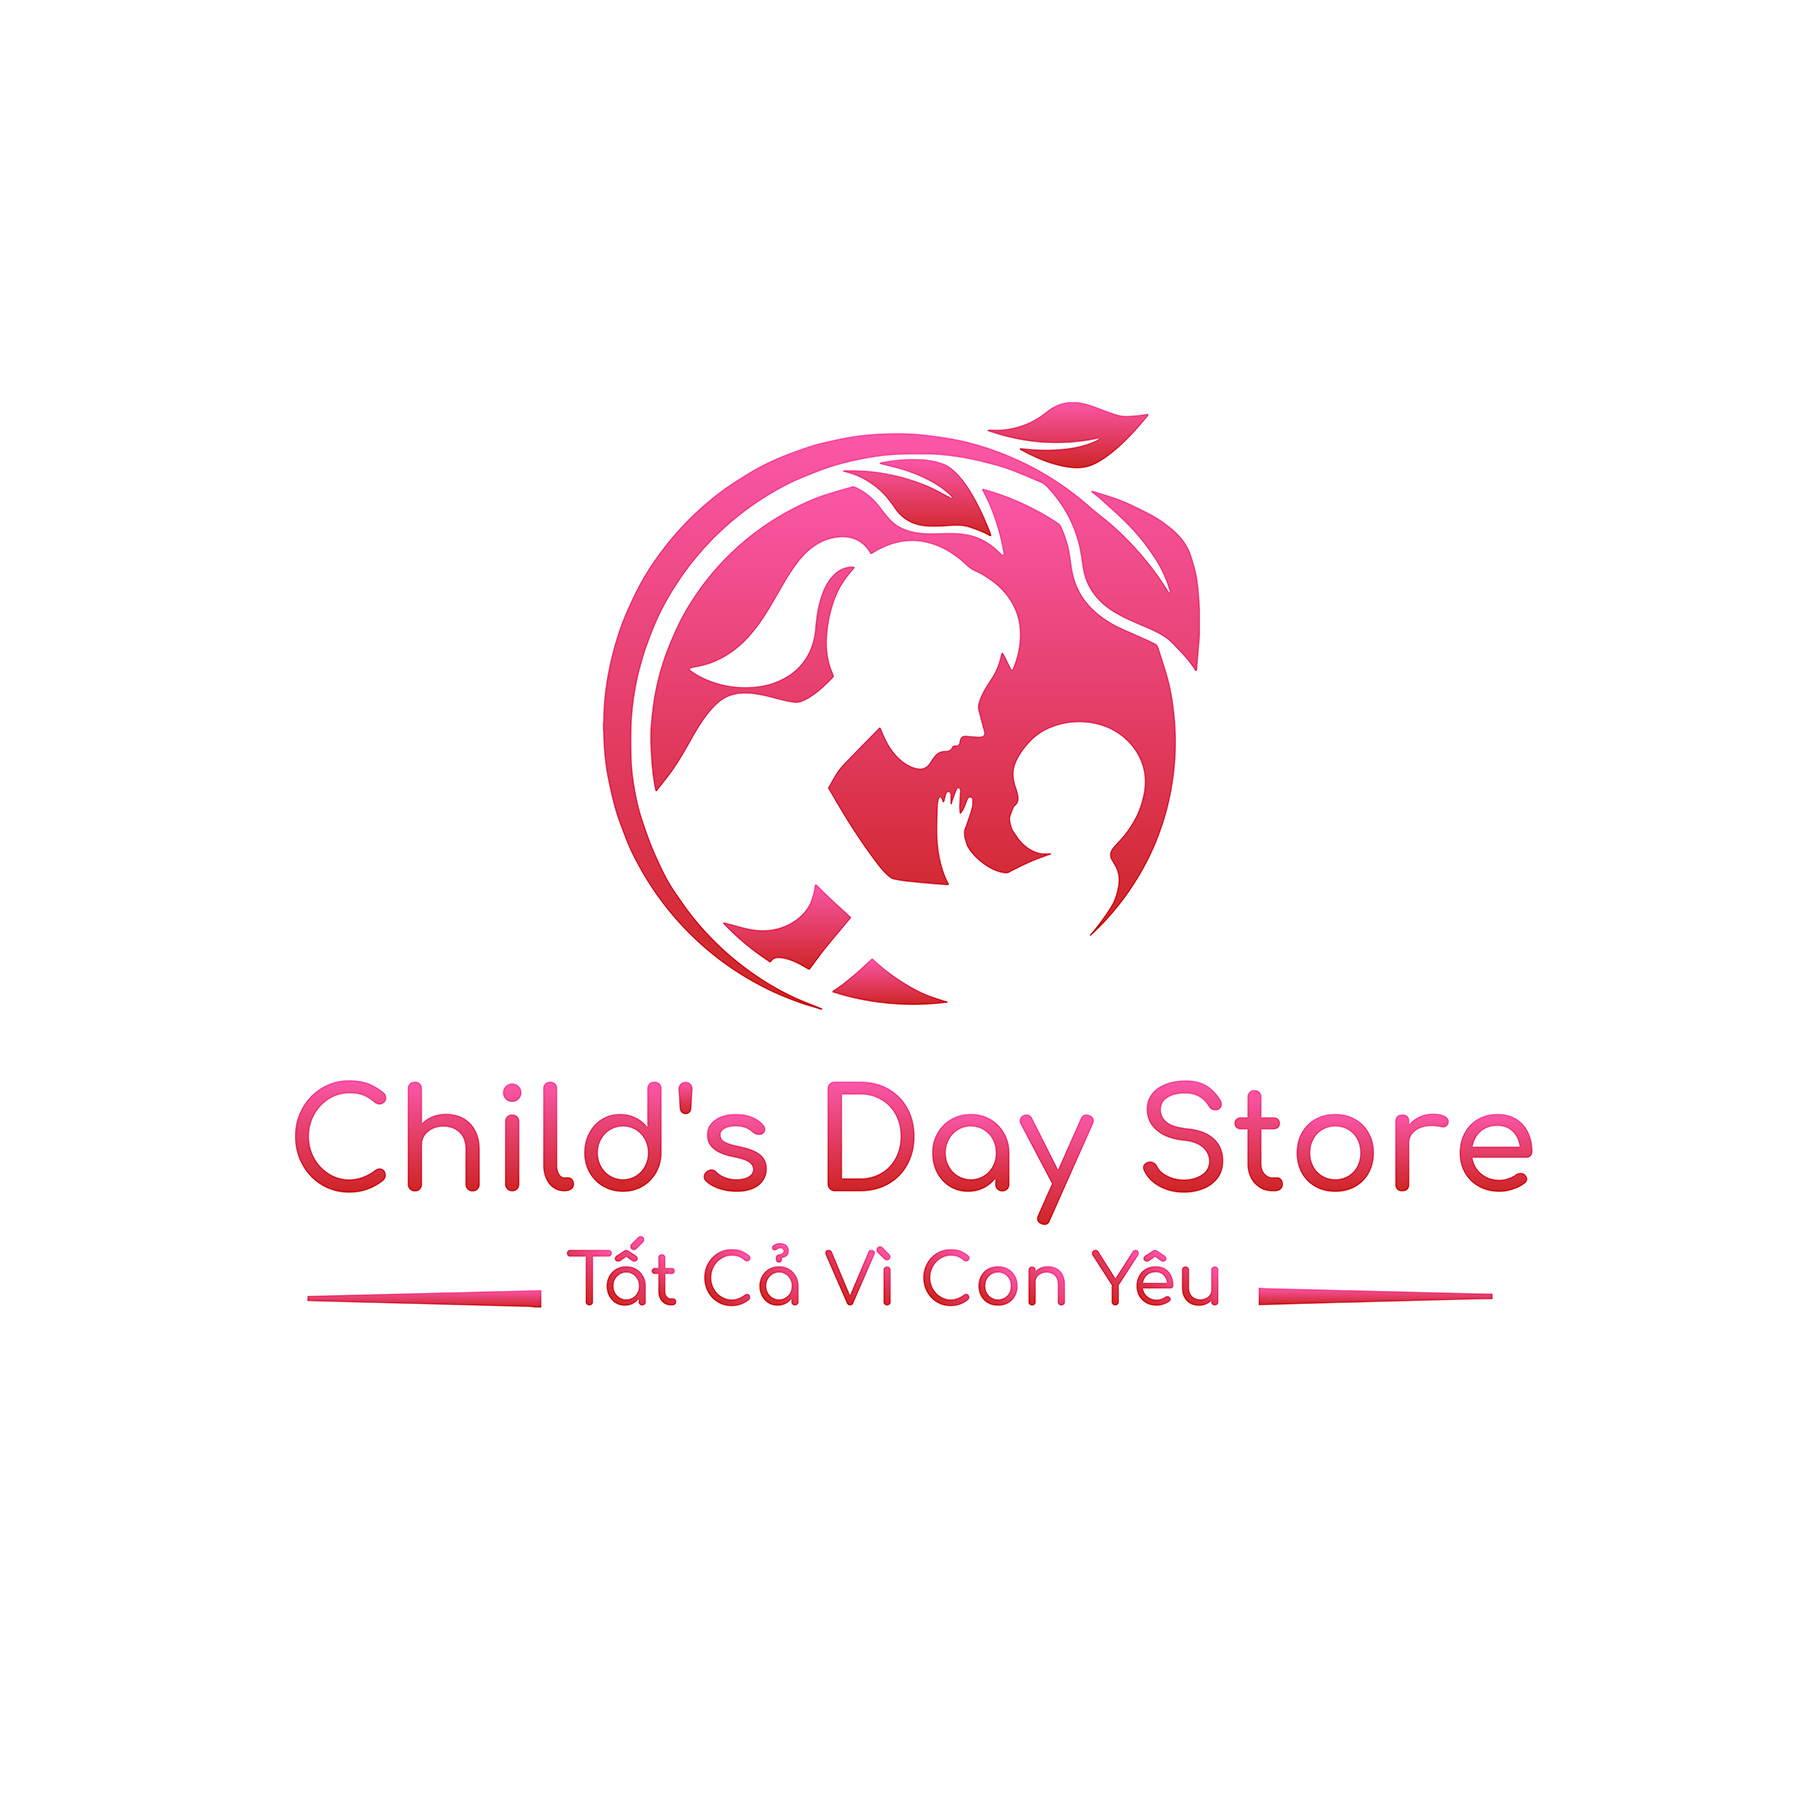 Childs Day Store